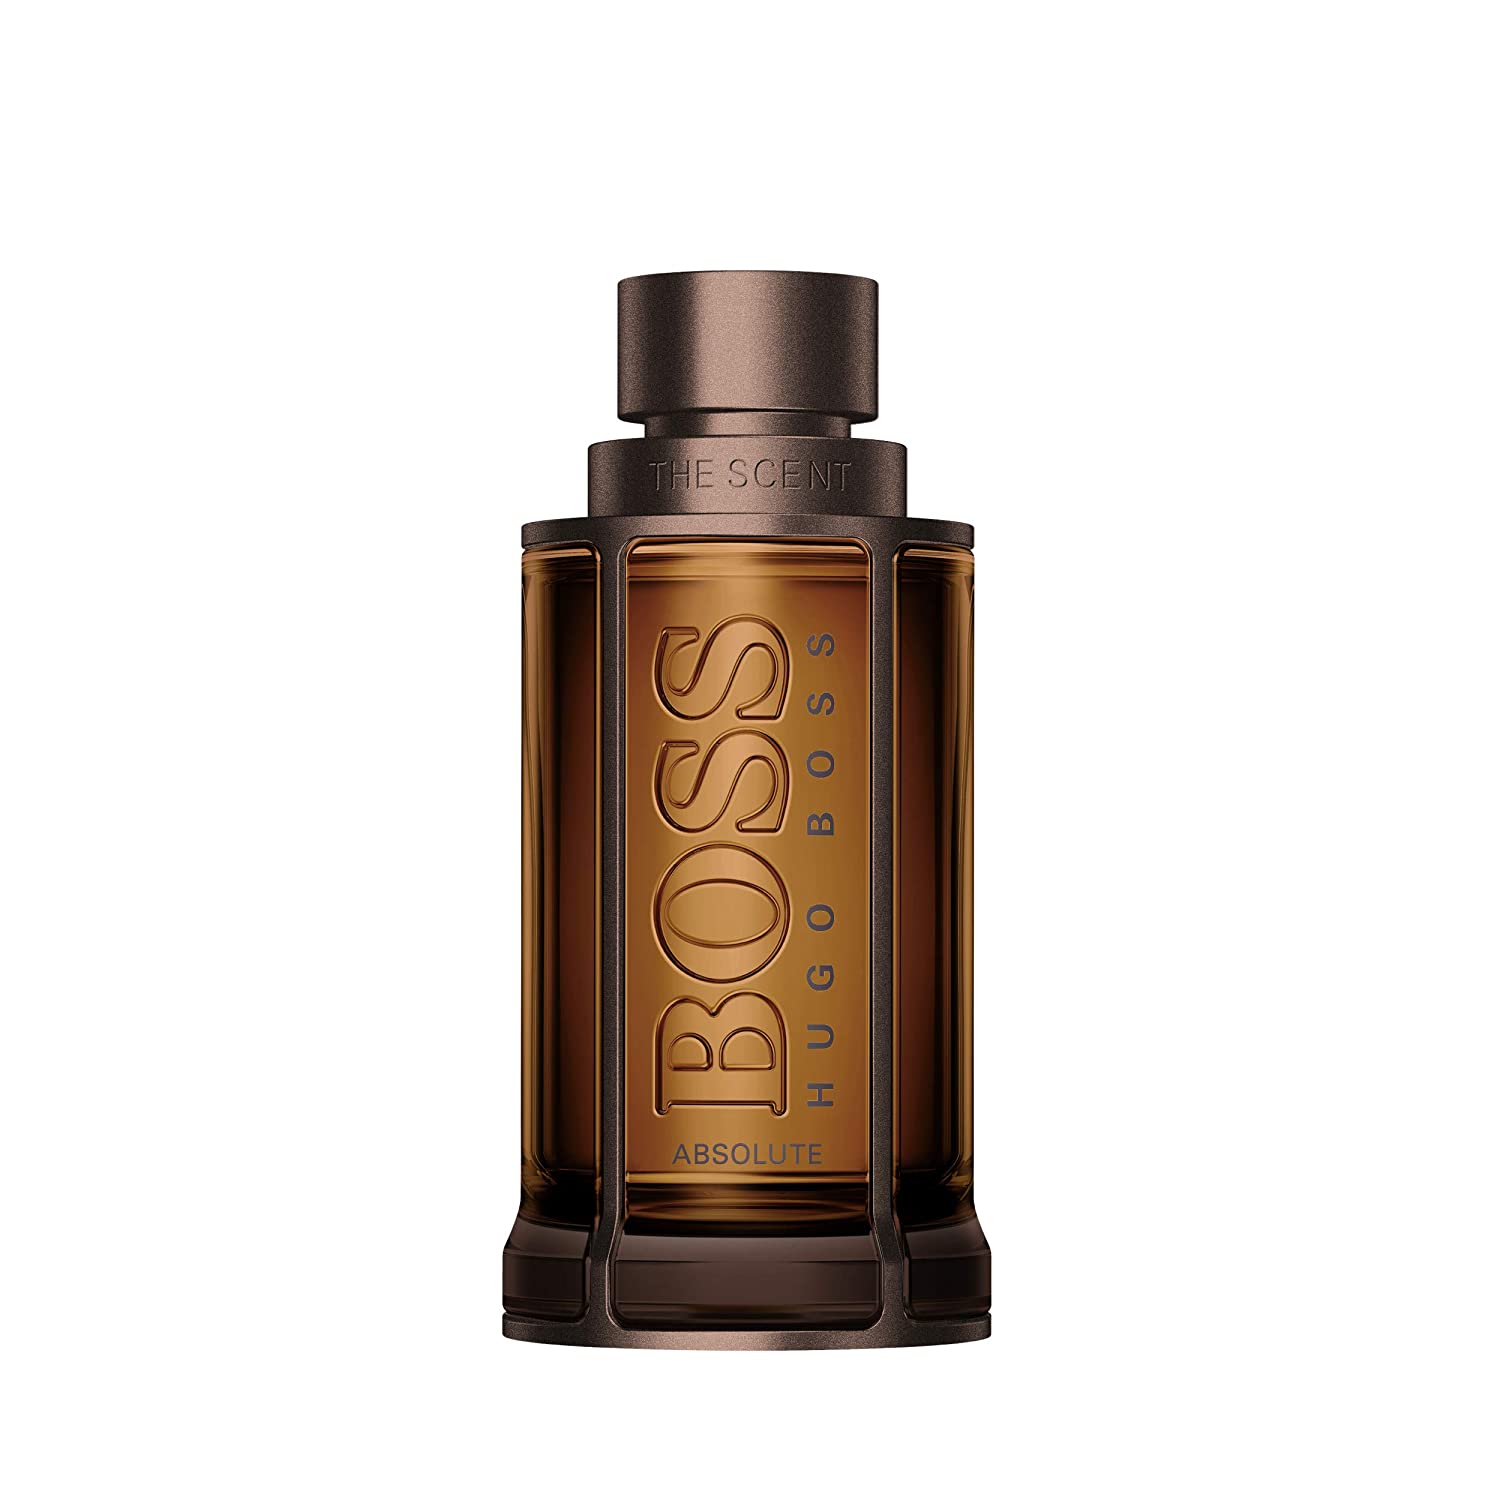 Hugo Boss The Scent Absolute 100ml ( Tester )